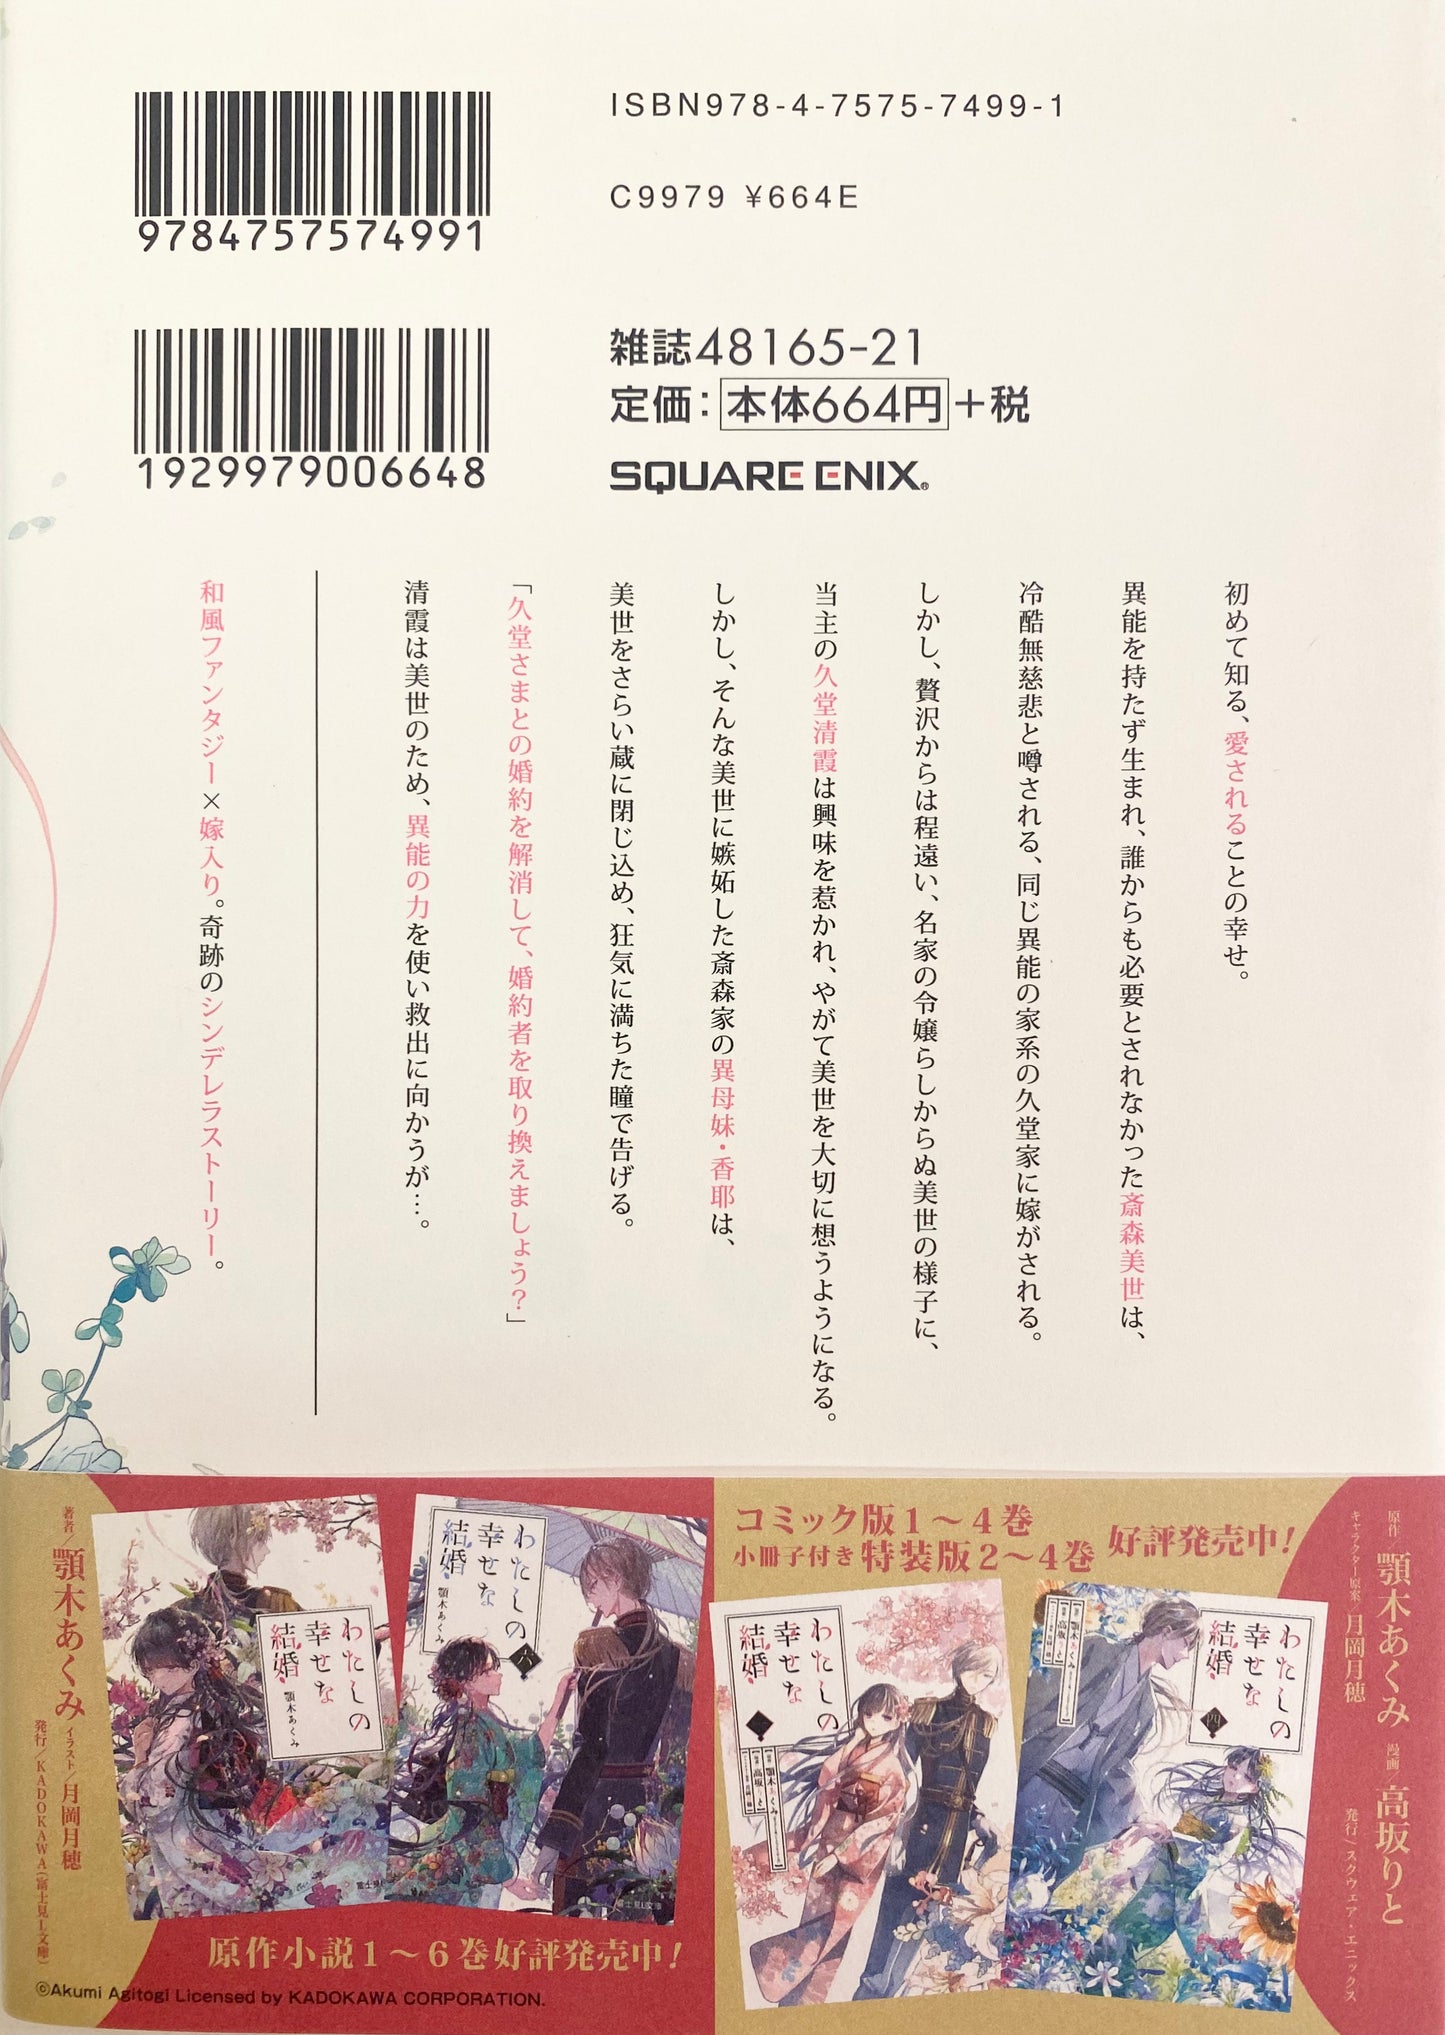 My Happy Marriage Vol.3-Official Japanese Edition